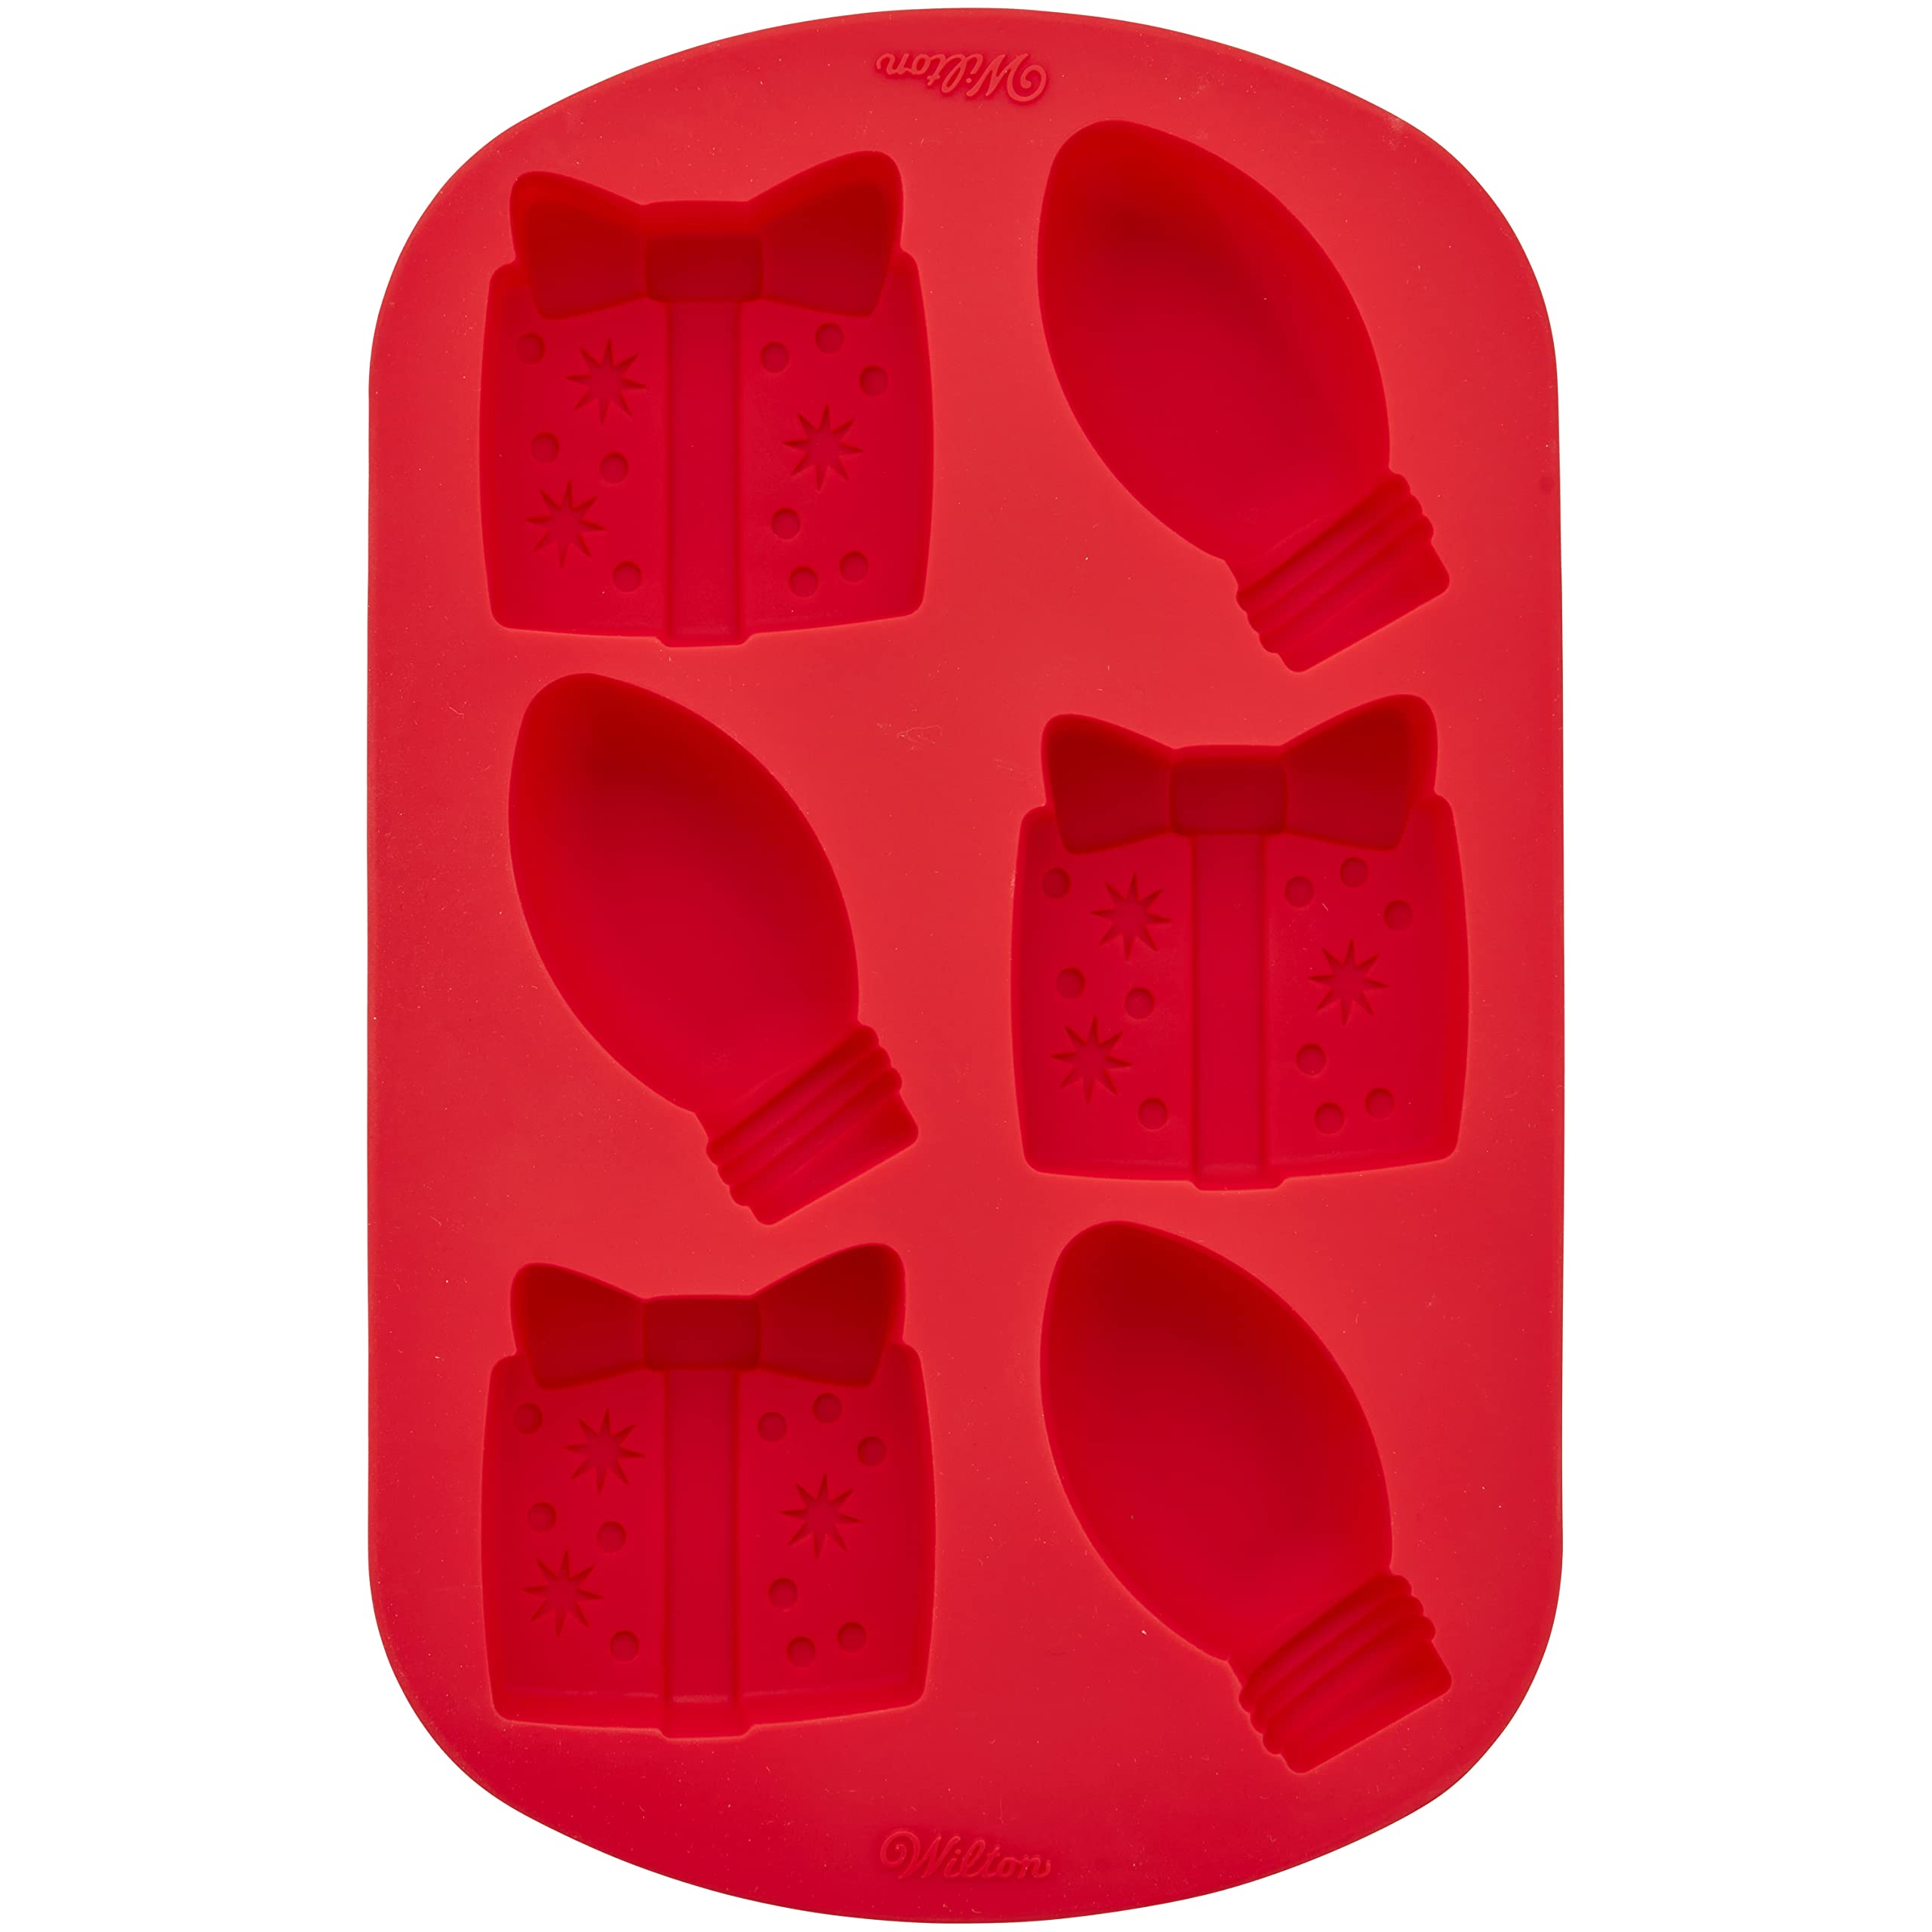 Wilton Christmas Present and Lightbulb Silicone Baking and Candy Mold, 6-Cavity